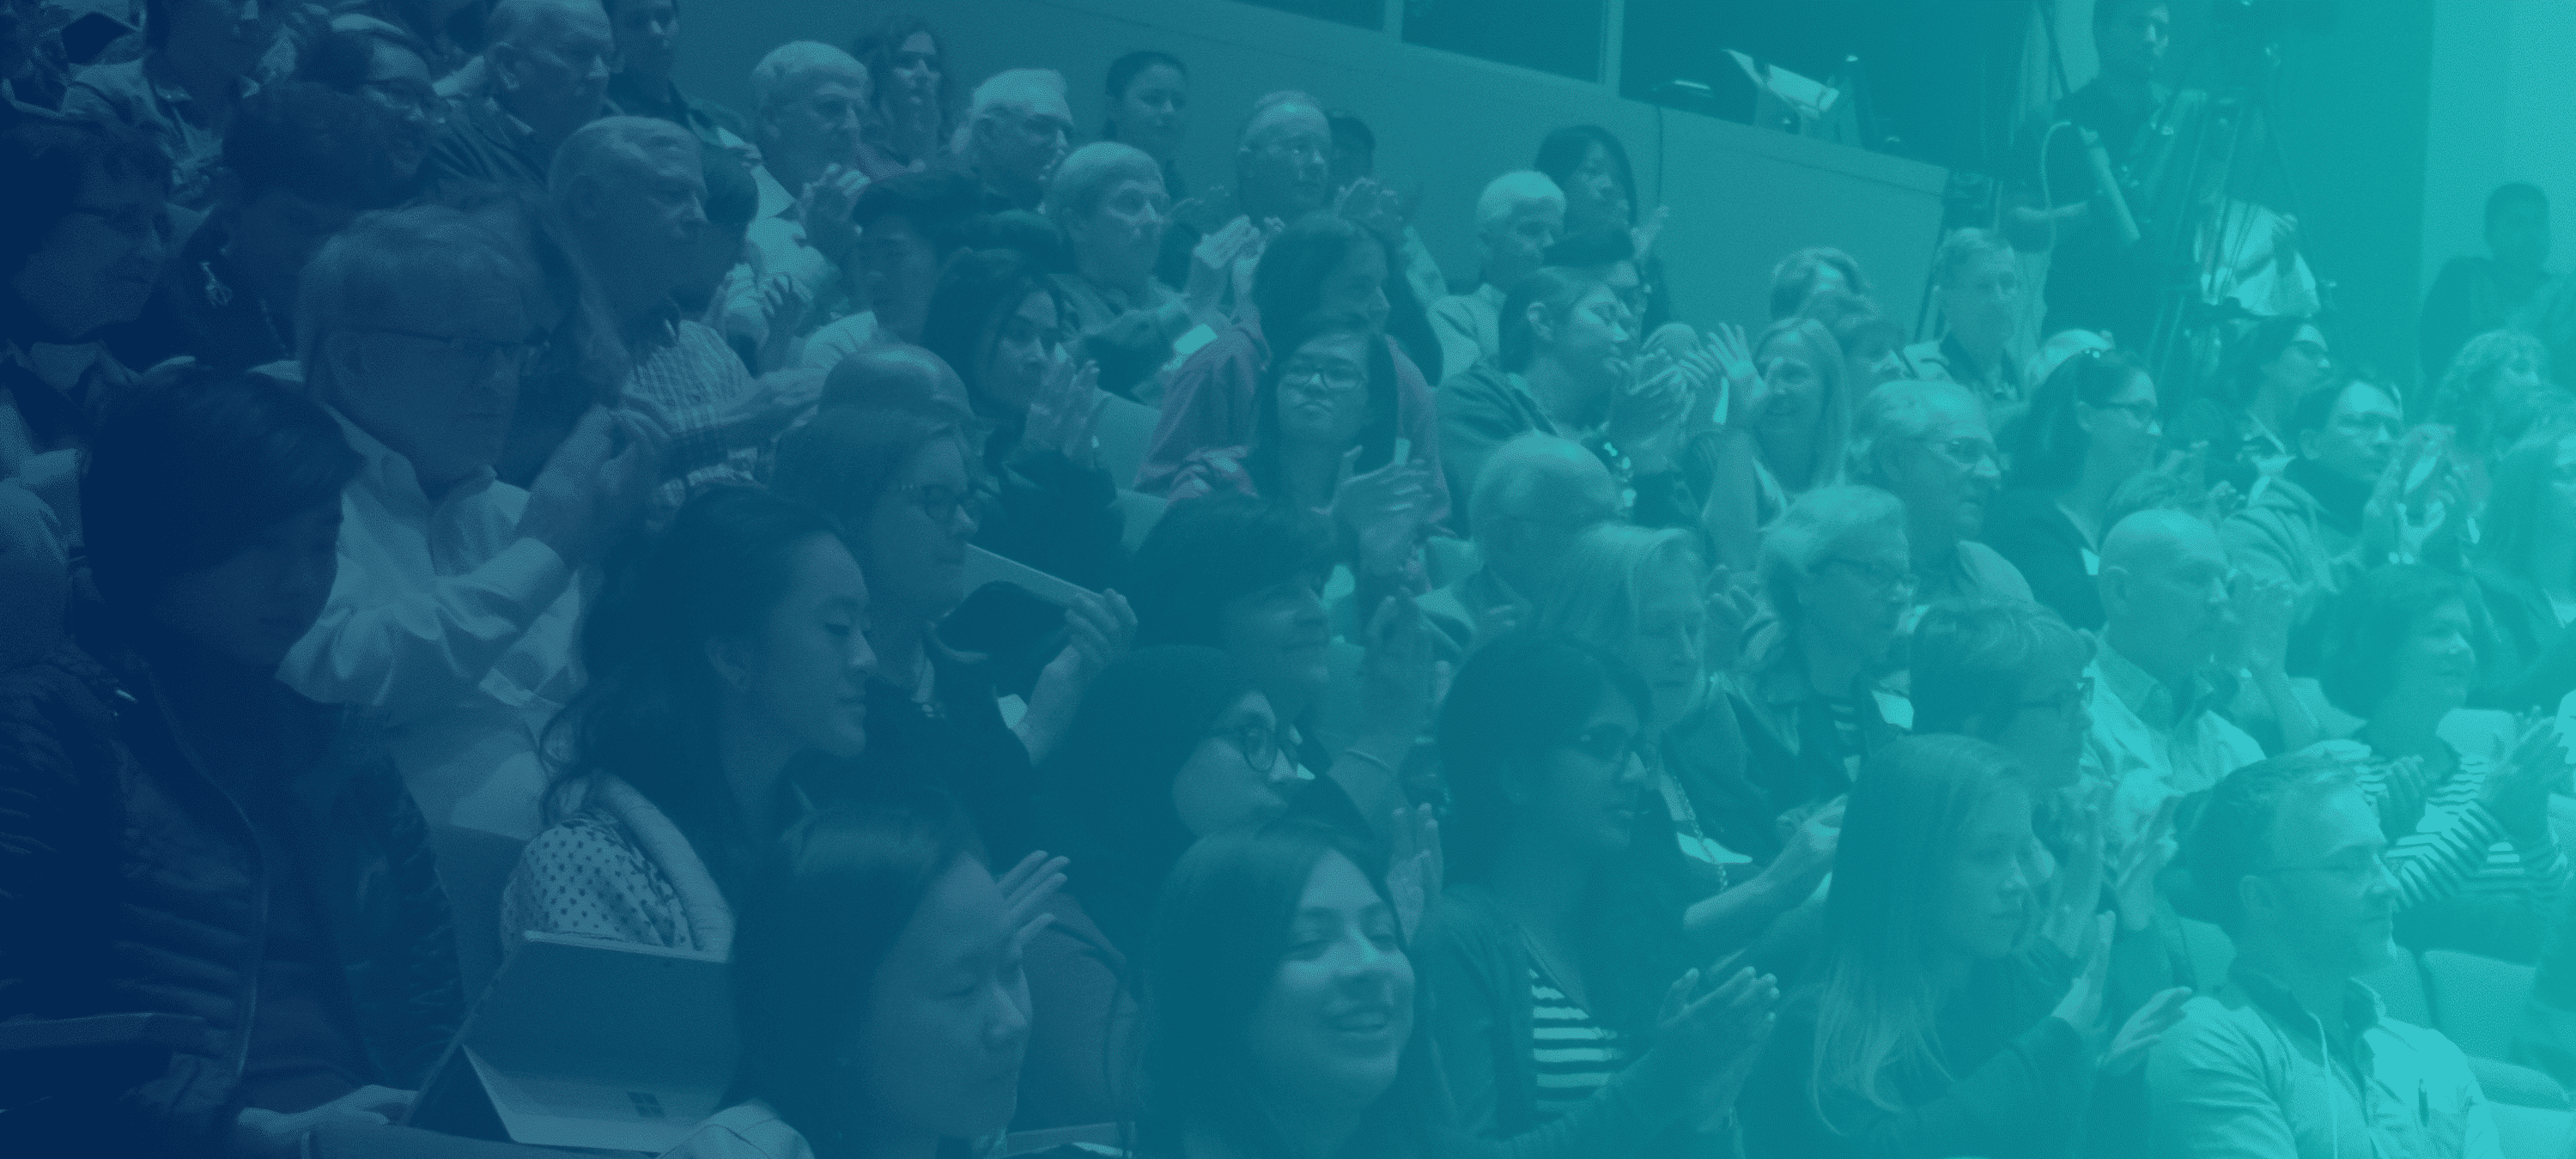 a picture of a crowd behind a blue faded gradient